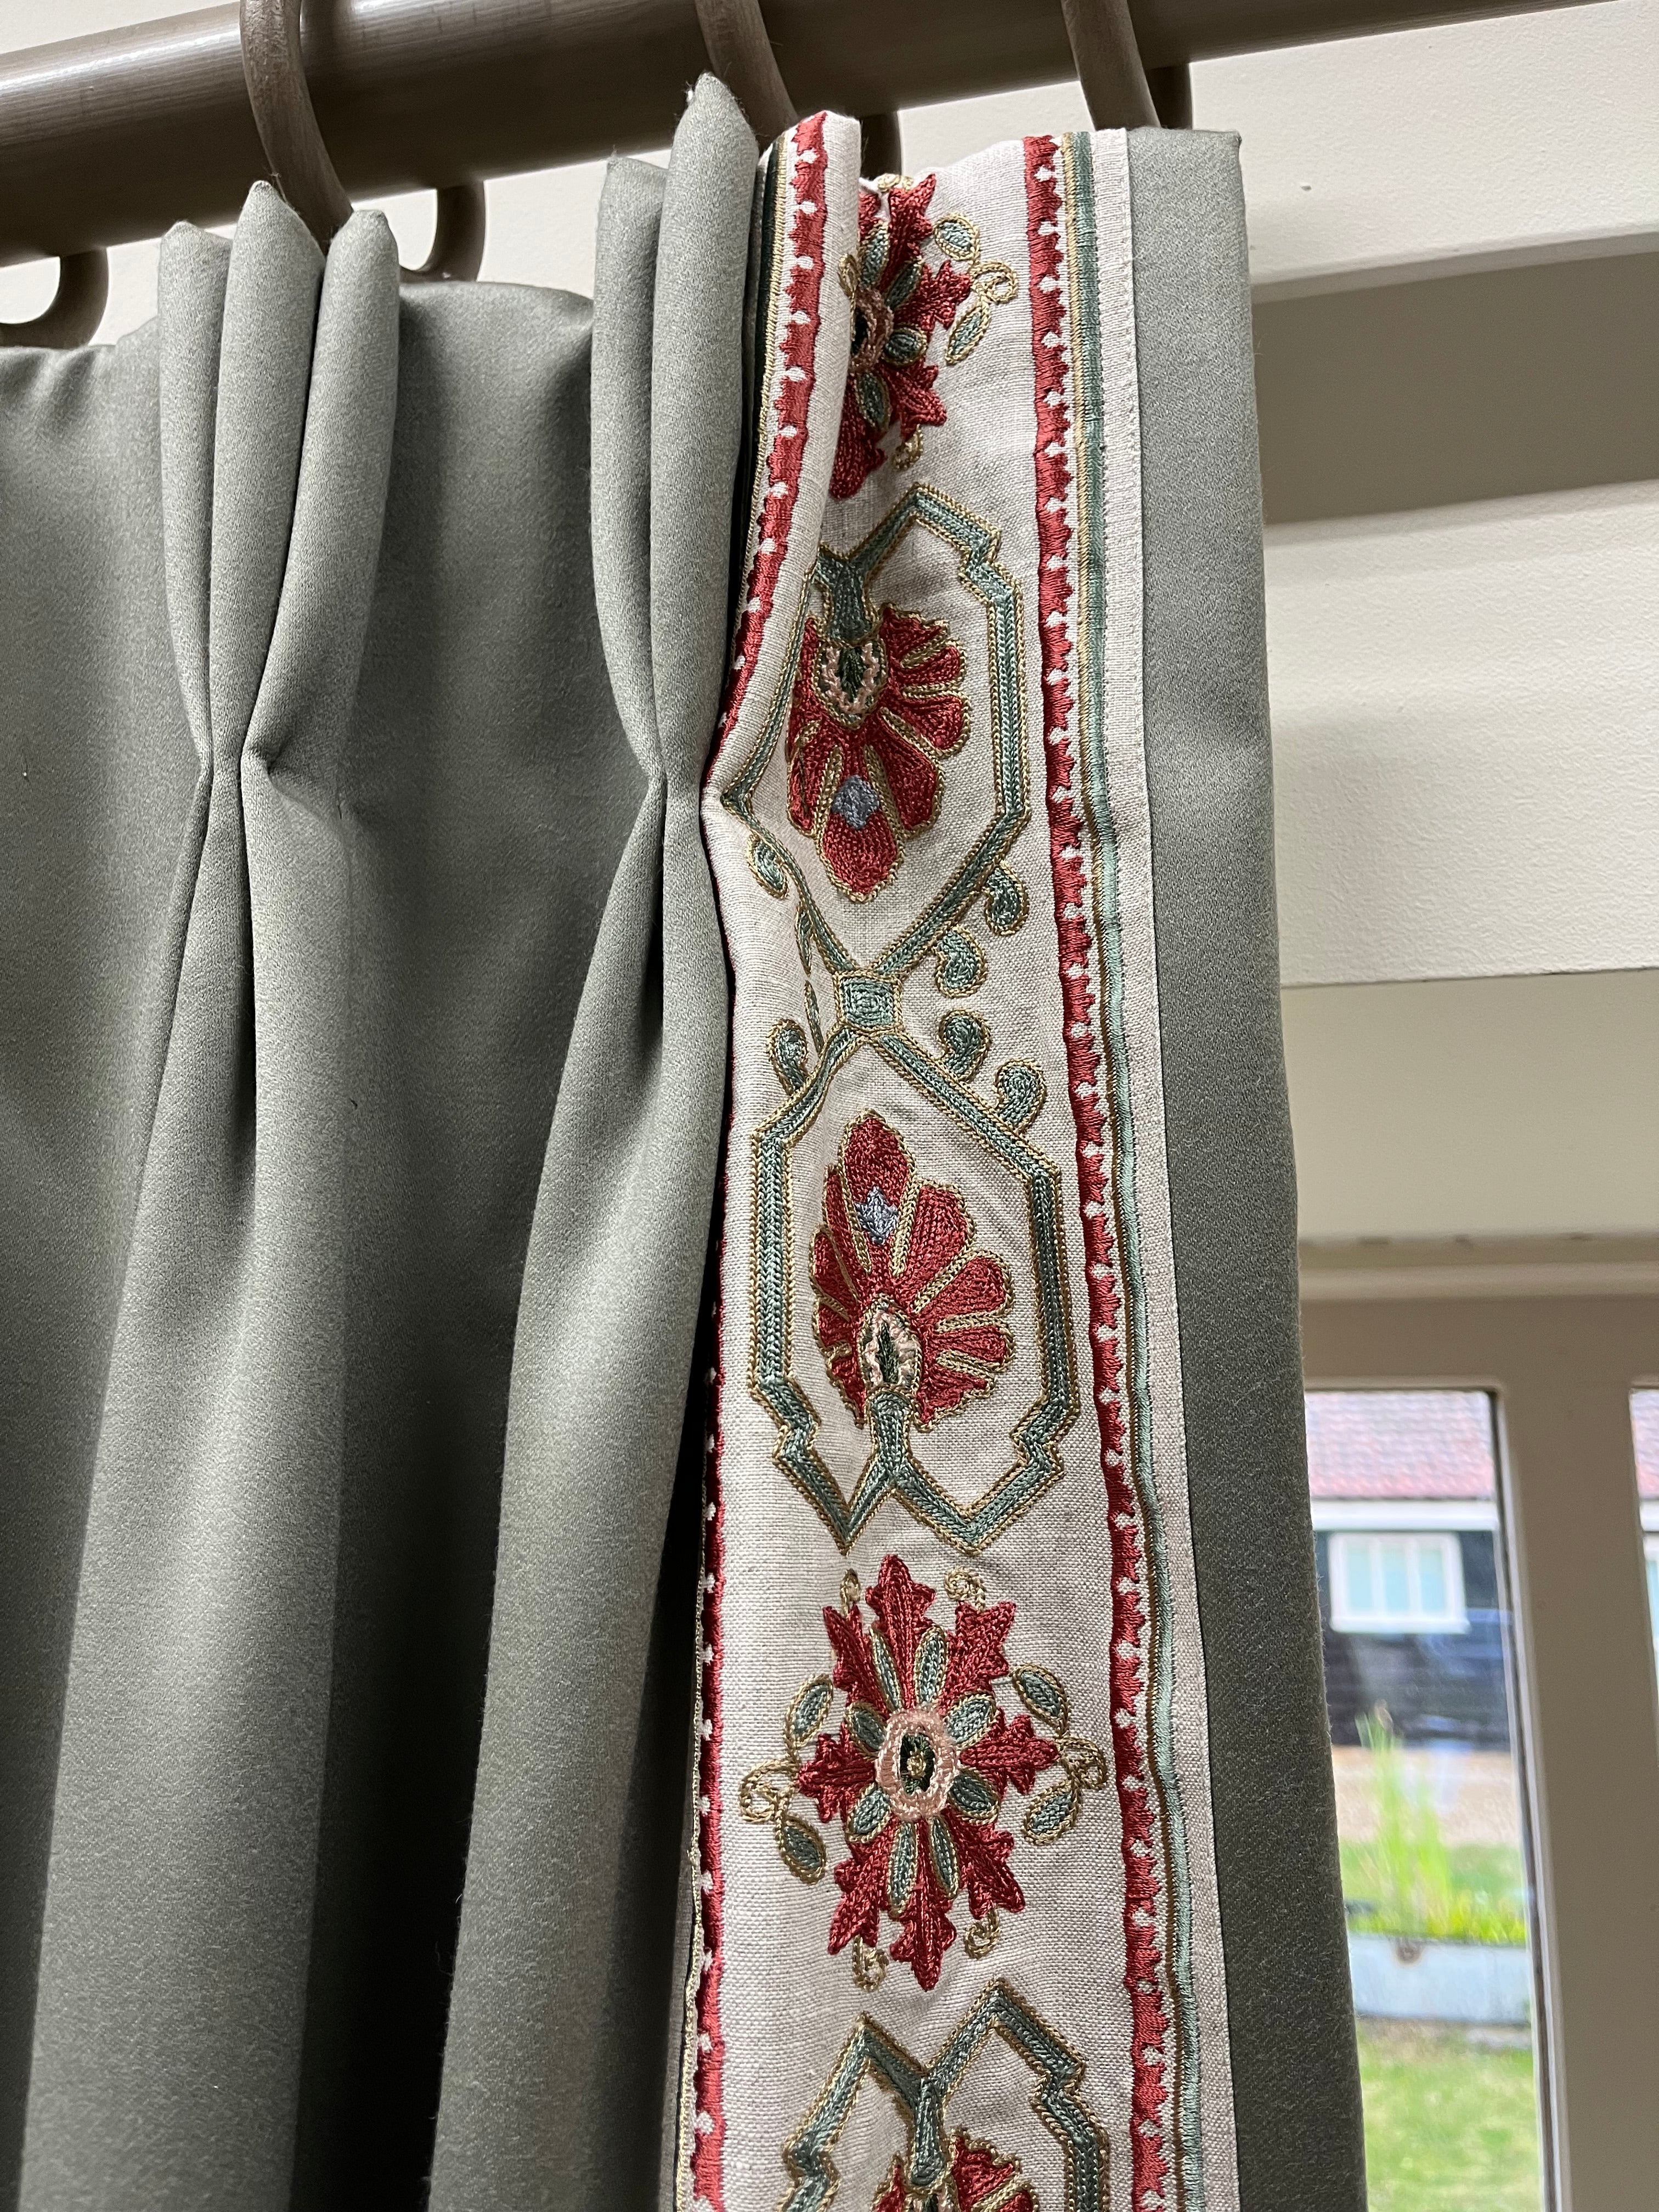 Ex -Display Triple Pinch Please Curtains in a Zoffany fabric with a braid leading edge